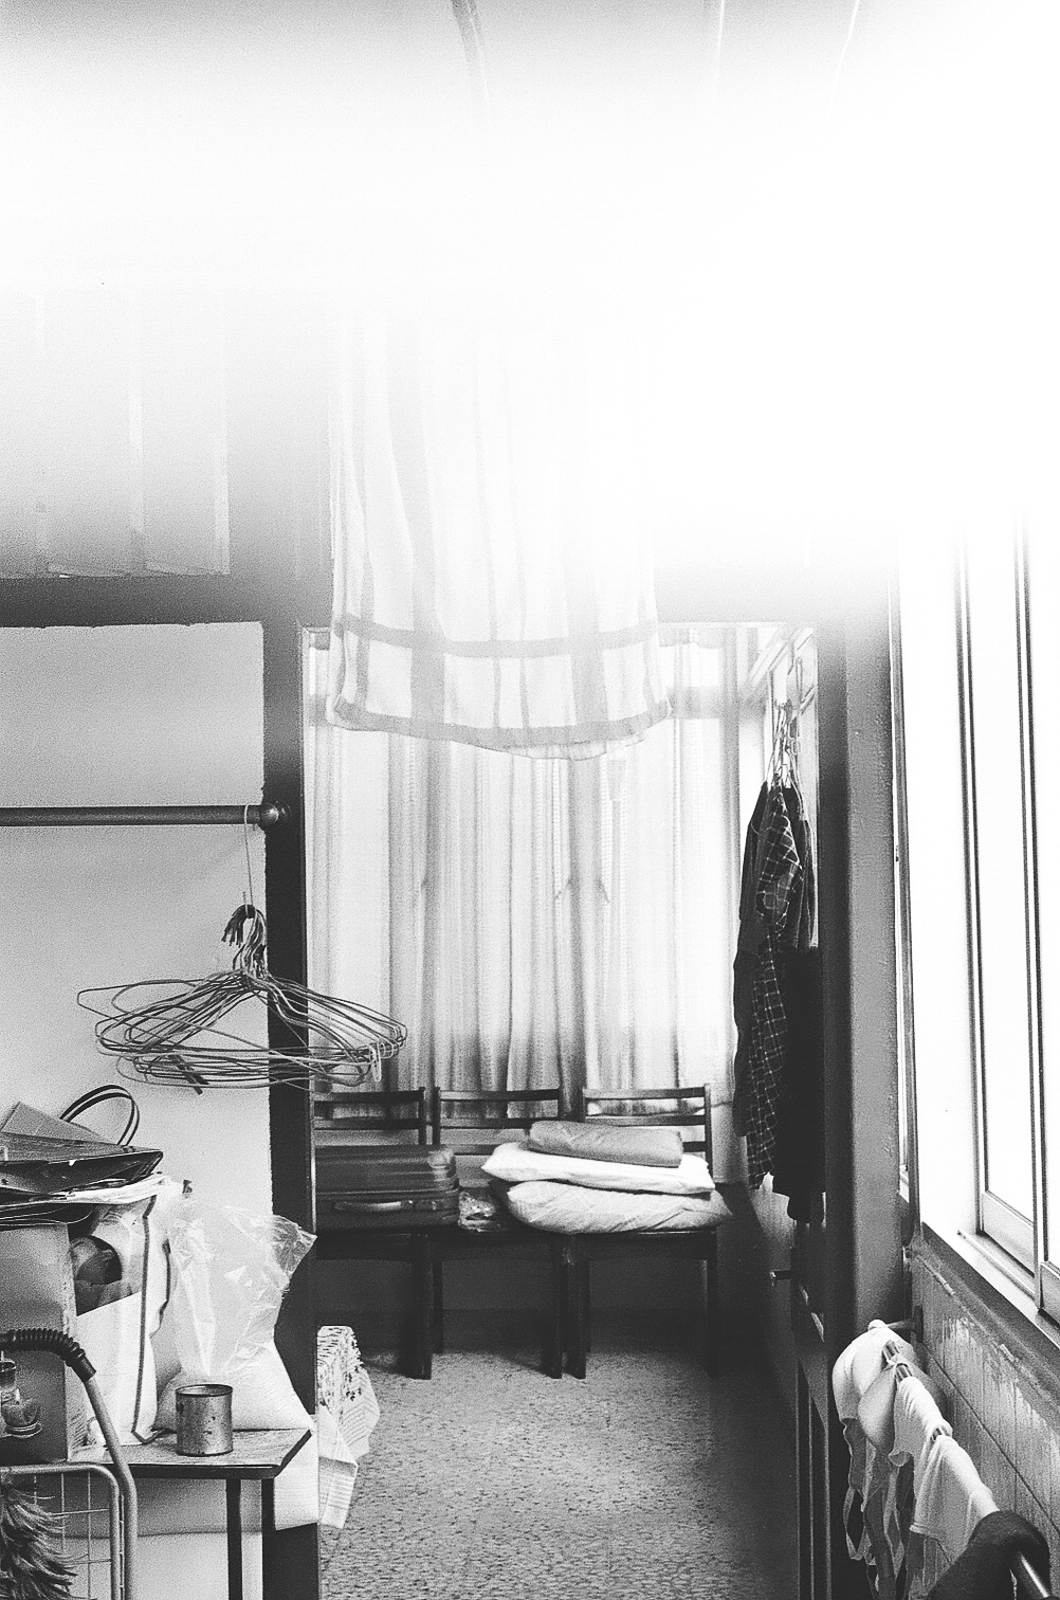 Black and white photo of a room cluttered with furniture and clothes hangers on the door handle.